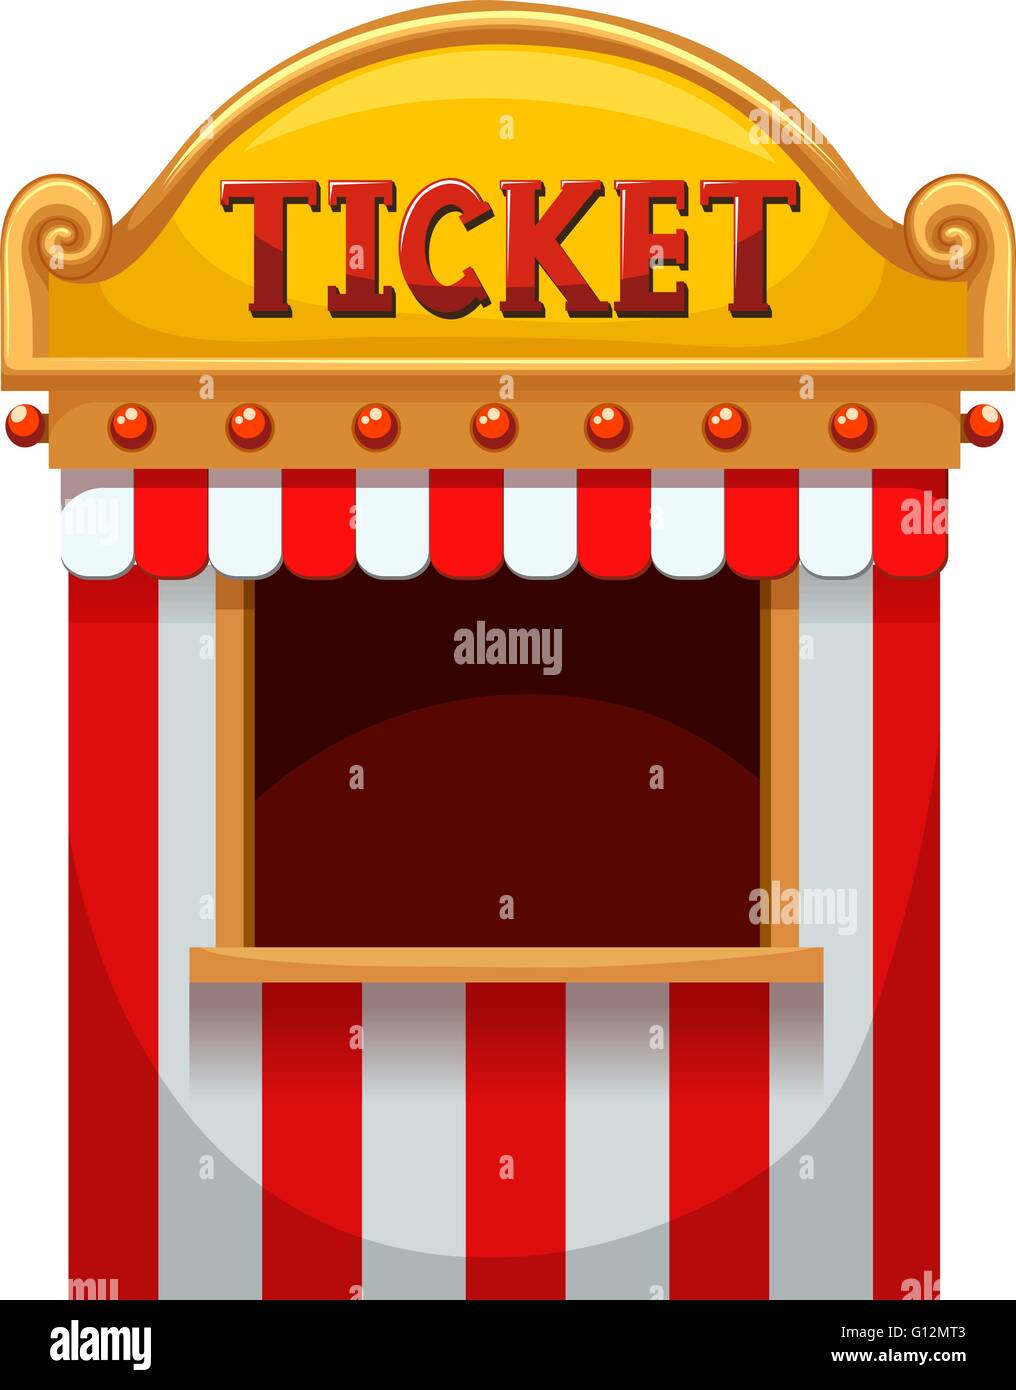 Carnival ticket Stock Vector Images - Alamy